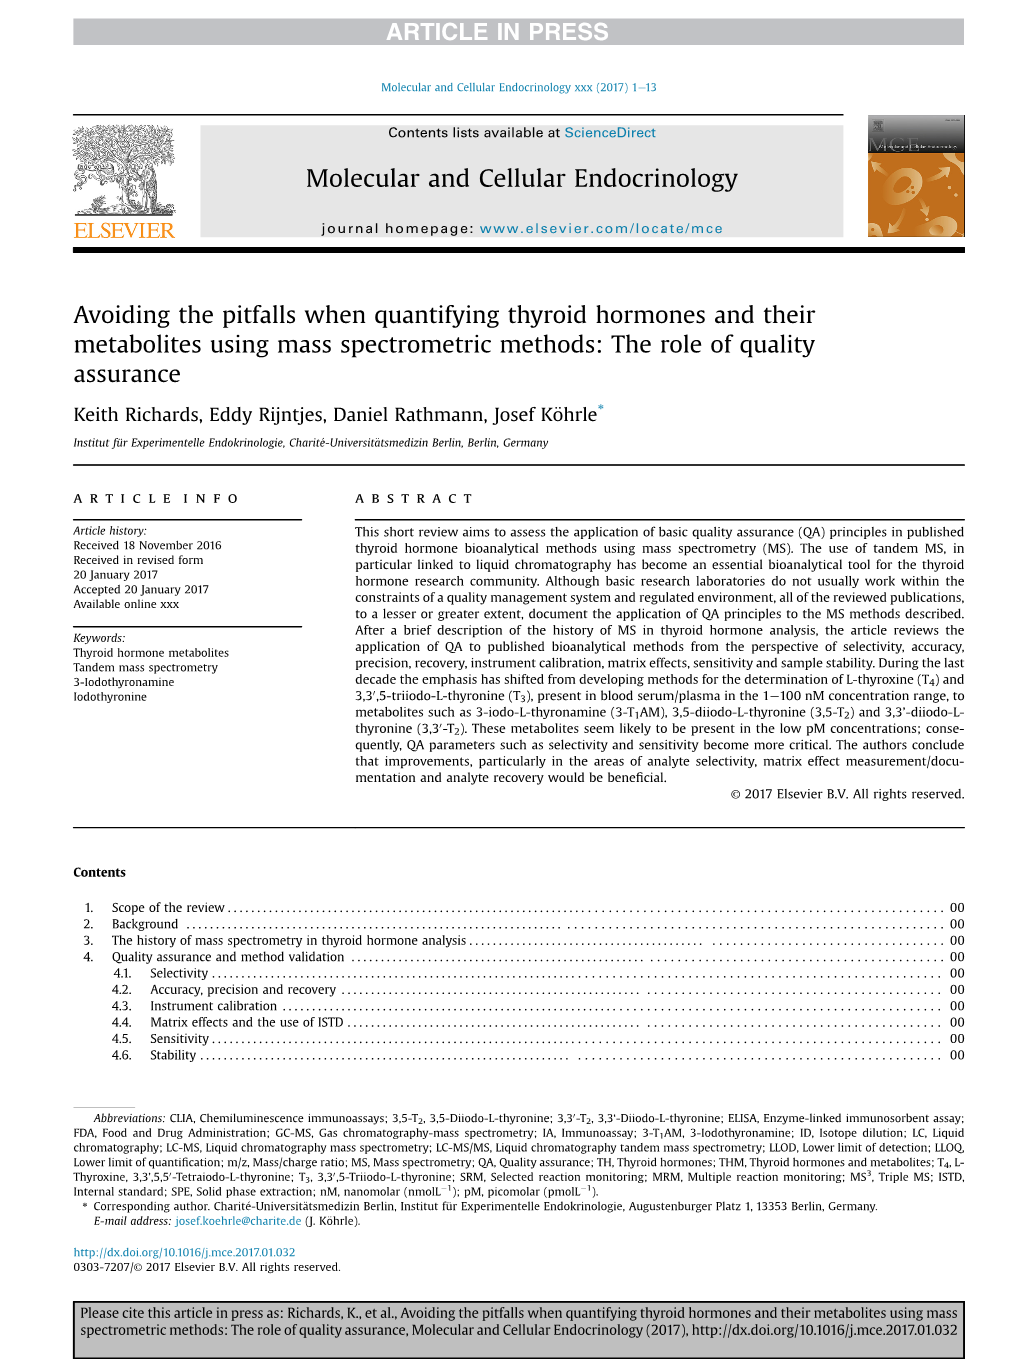 Avoiding the Pitfalls When Quantifying Thyroid Hormones and Their Metabolites Using Mass Spectrometric Methods: the Role of Quality Assurance